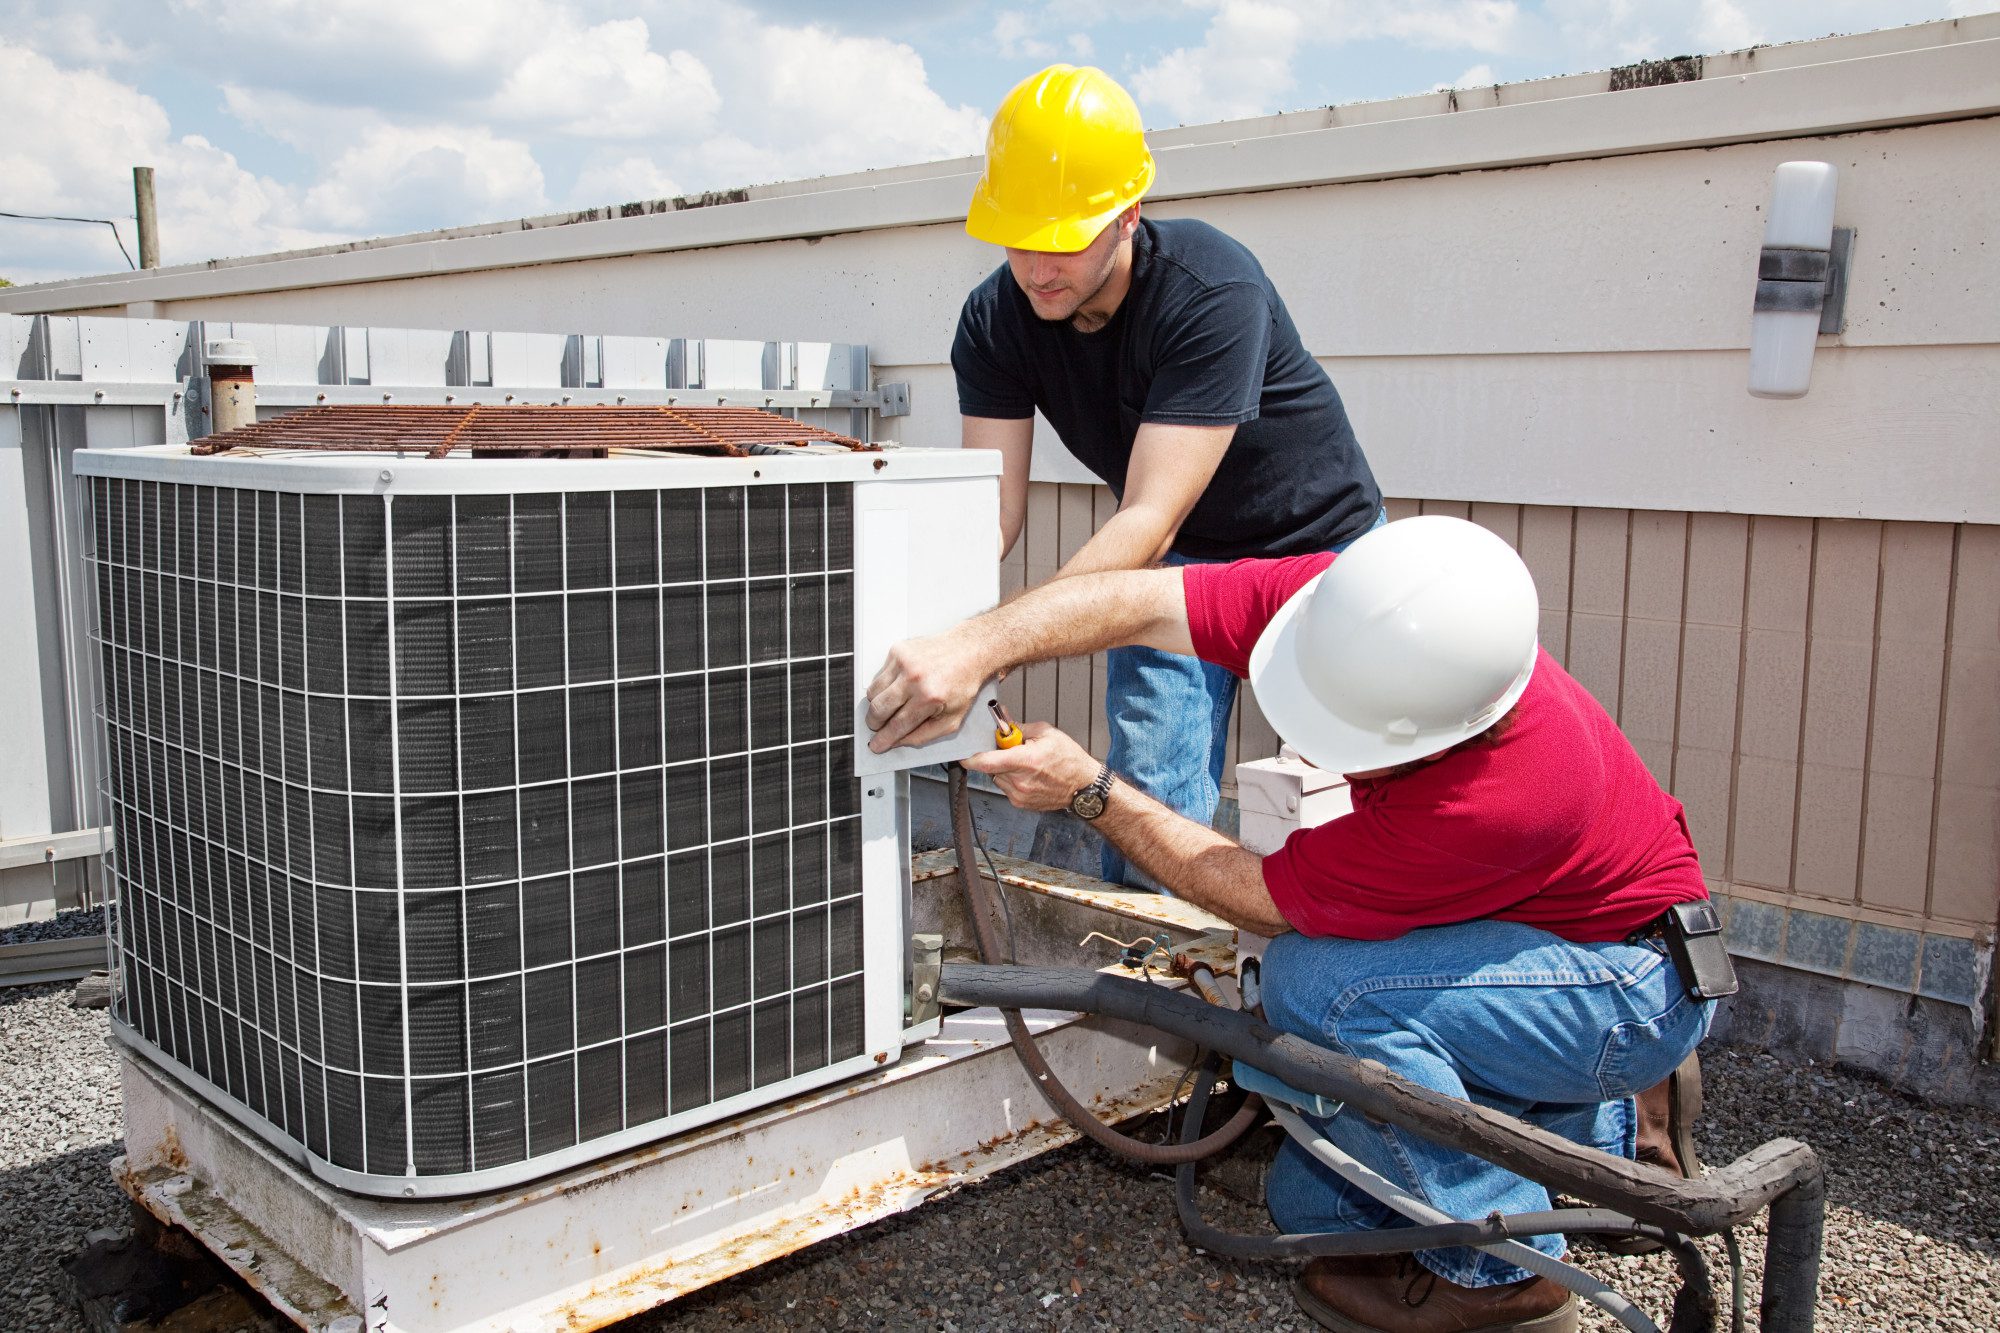 5 Questions to Ask HVAC Companies in Toronto Before Hiring